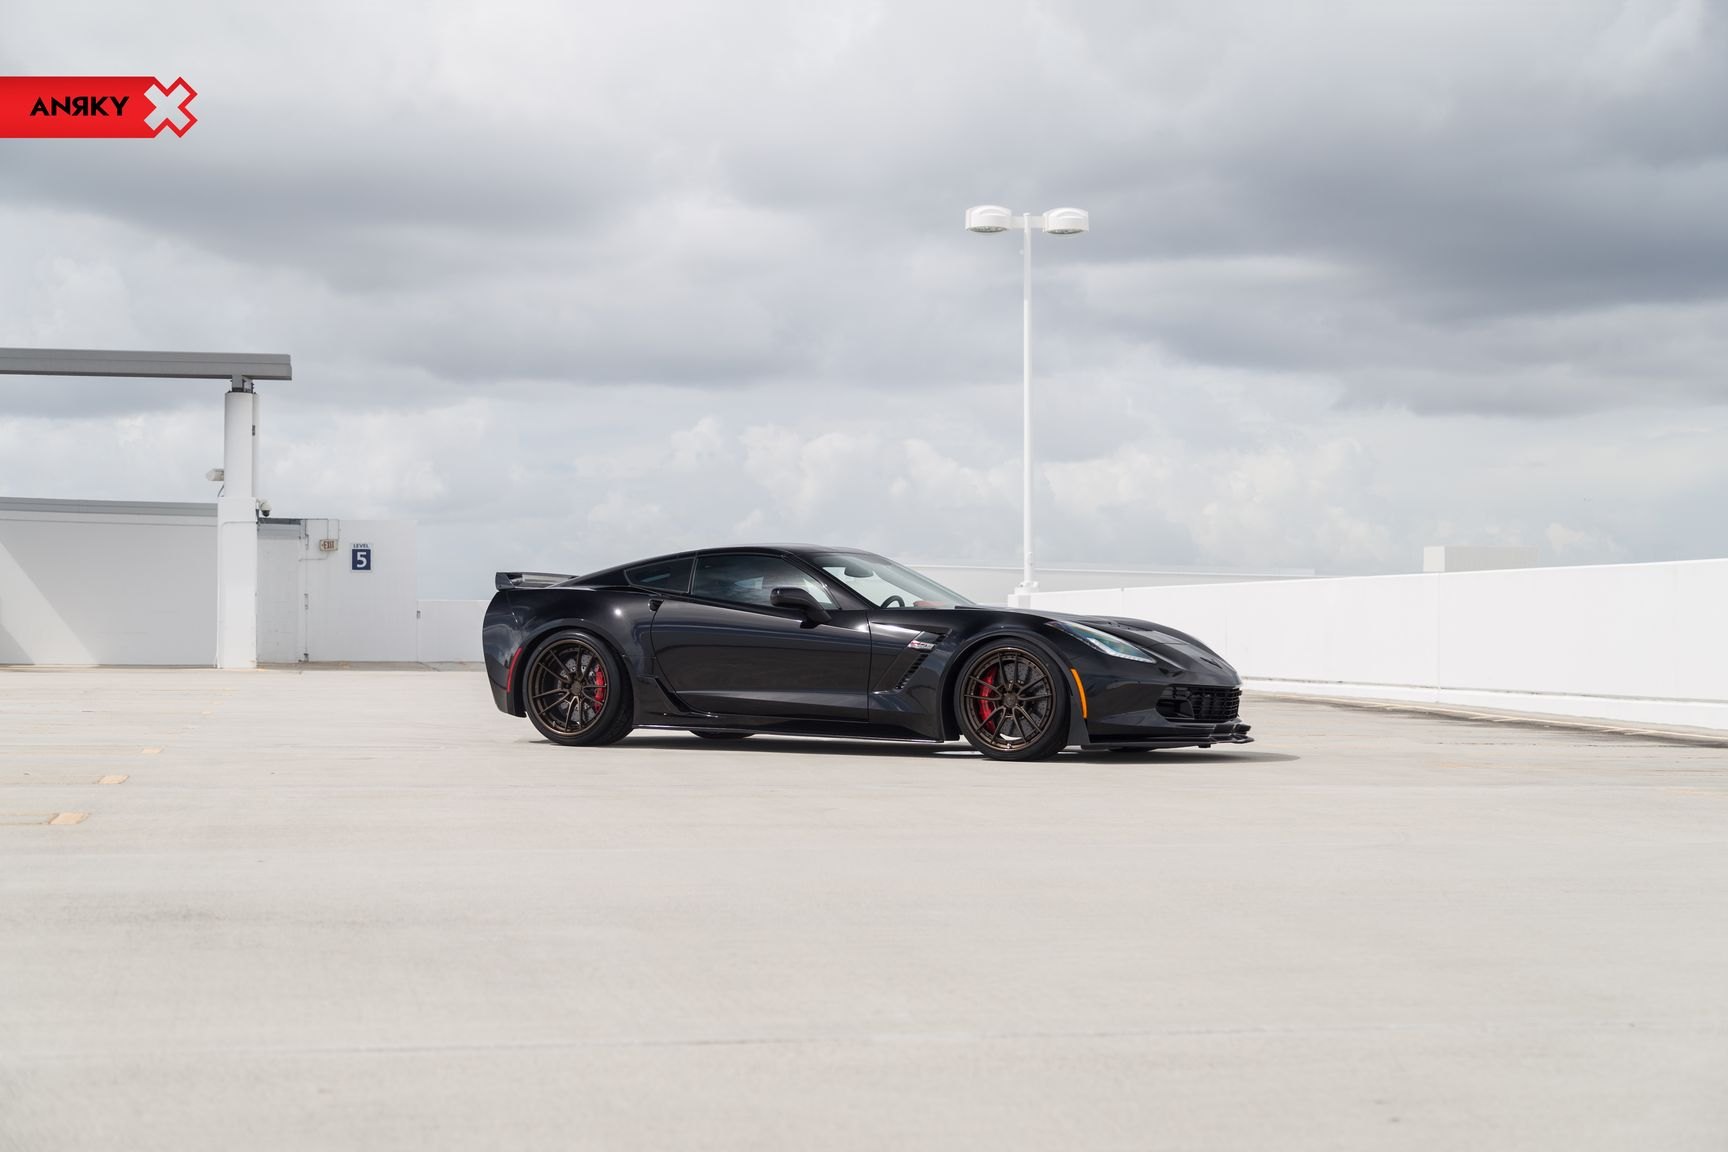 Black Chevy Corvette with Matte Bronze Anrky Wheels - Photo by Anrky Wheels